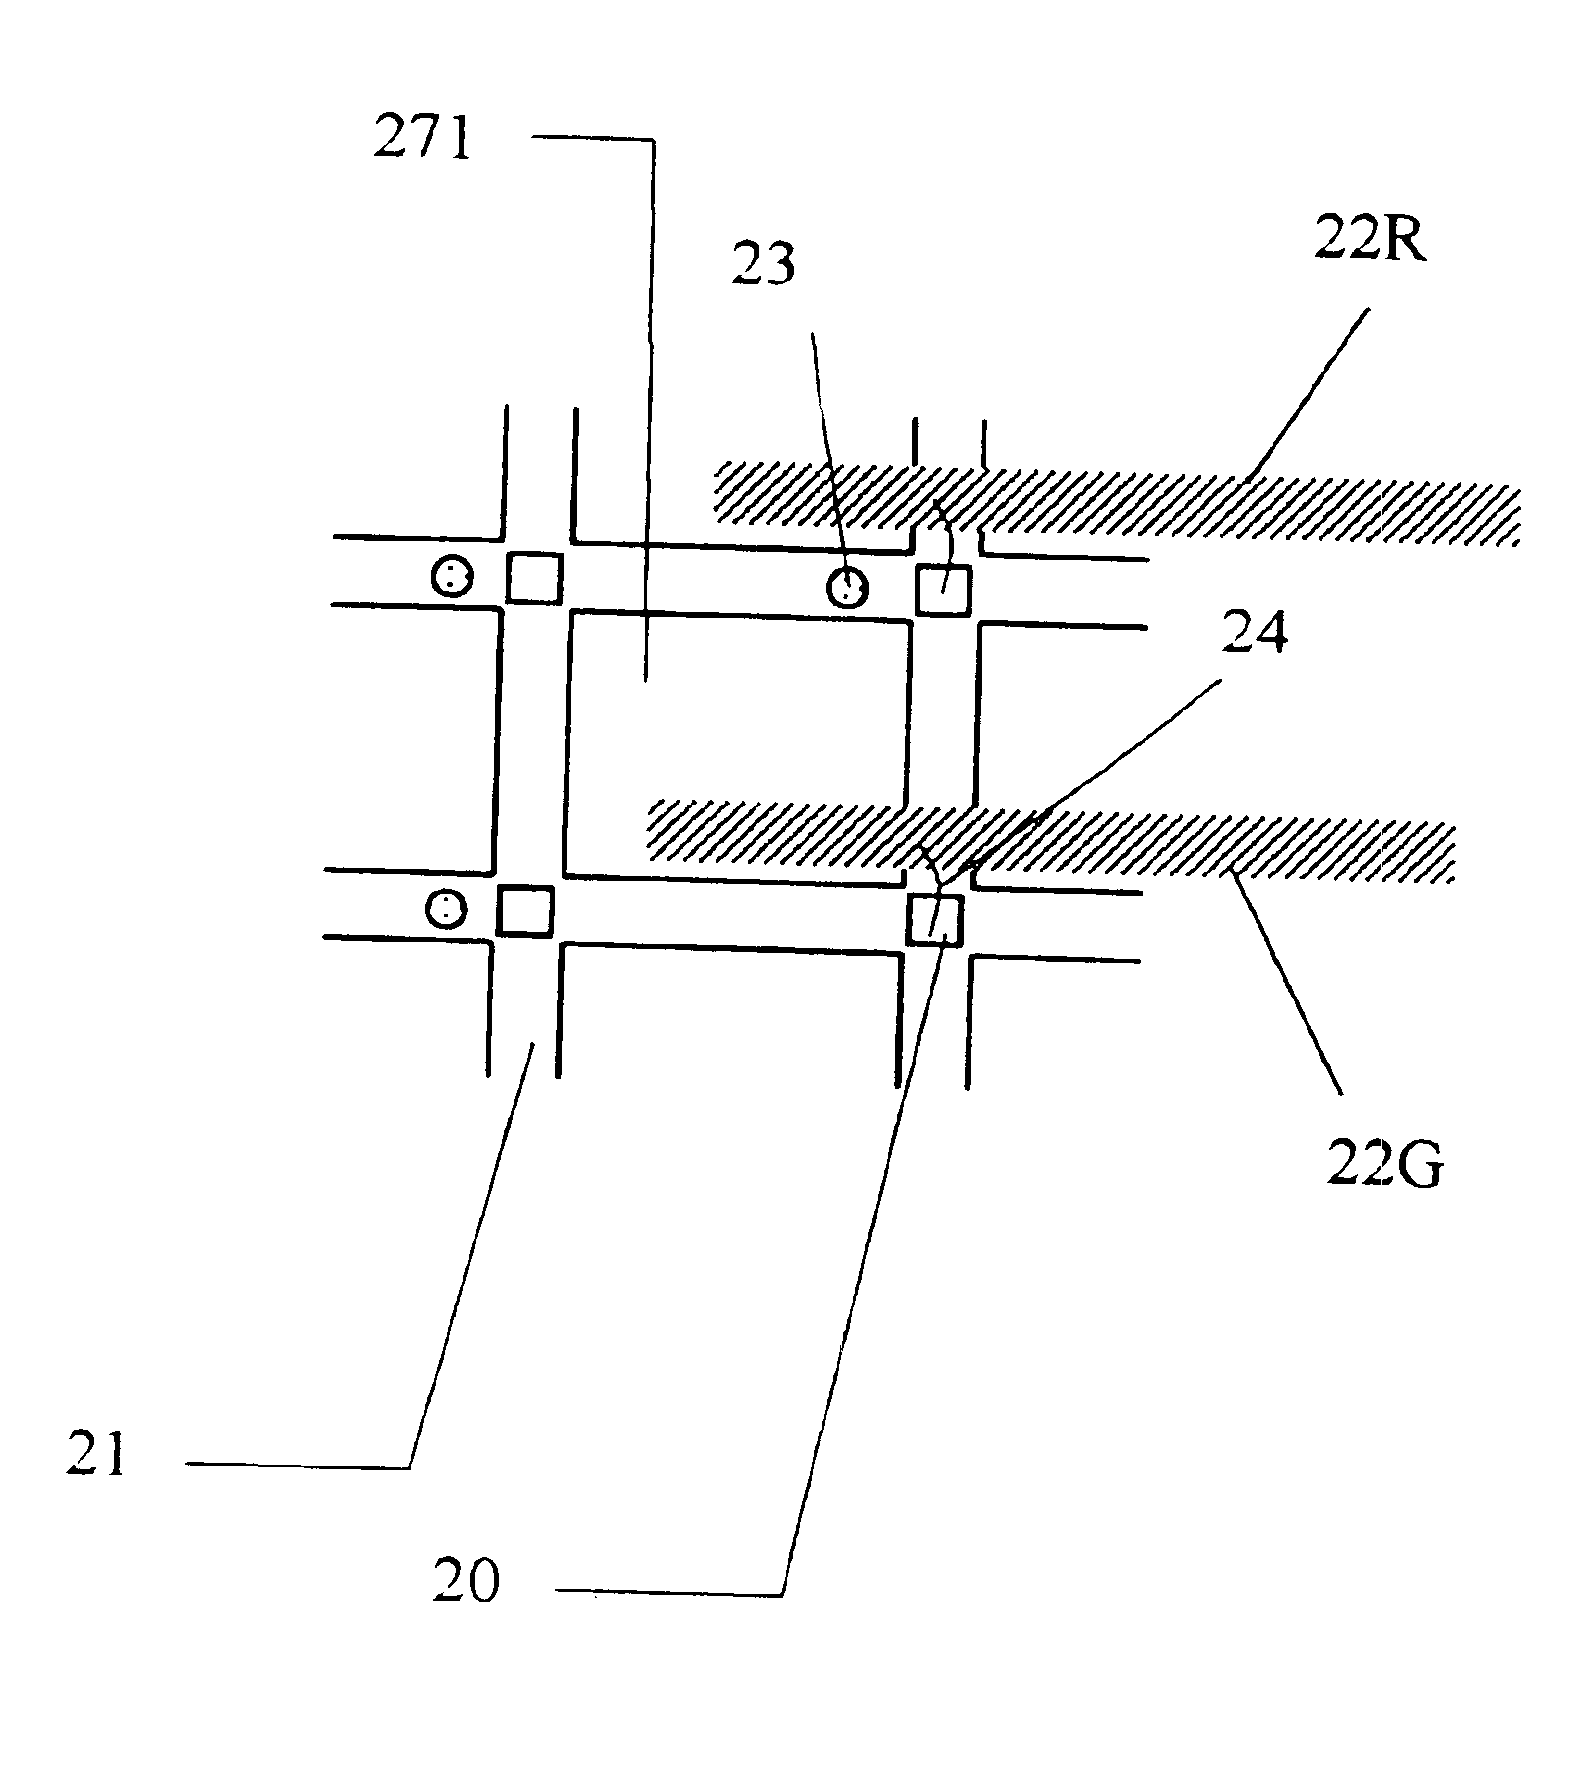 Projector with array LED matrix light source